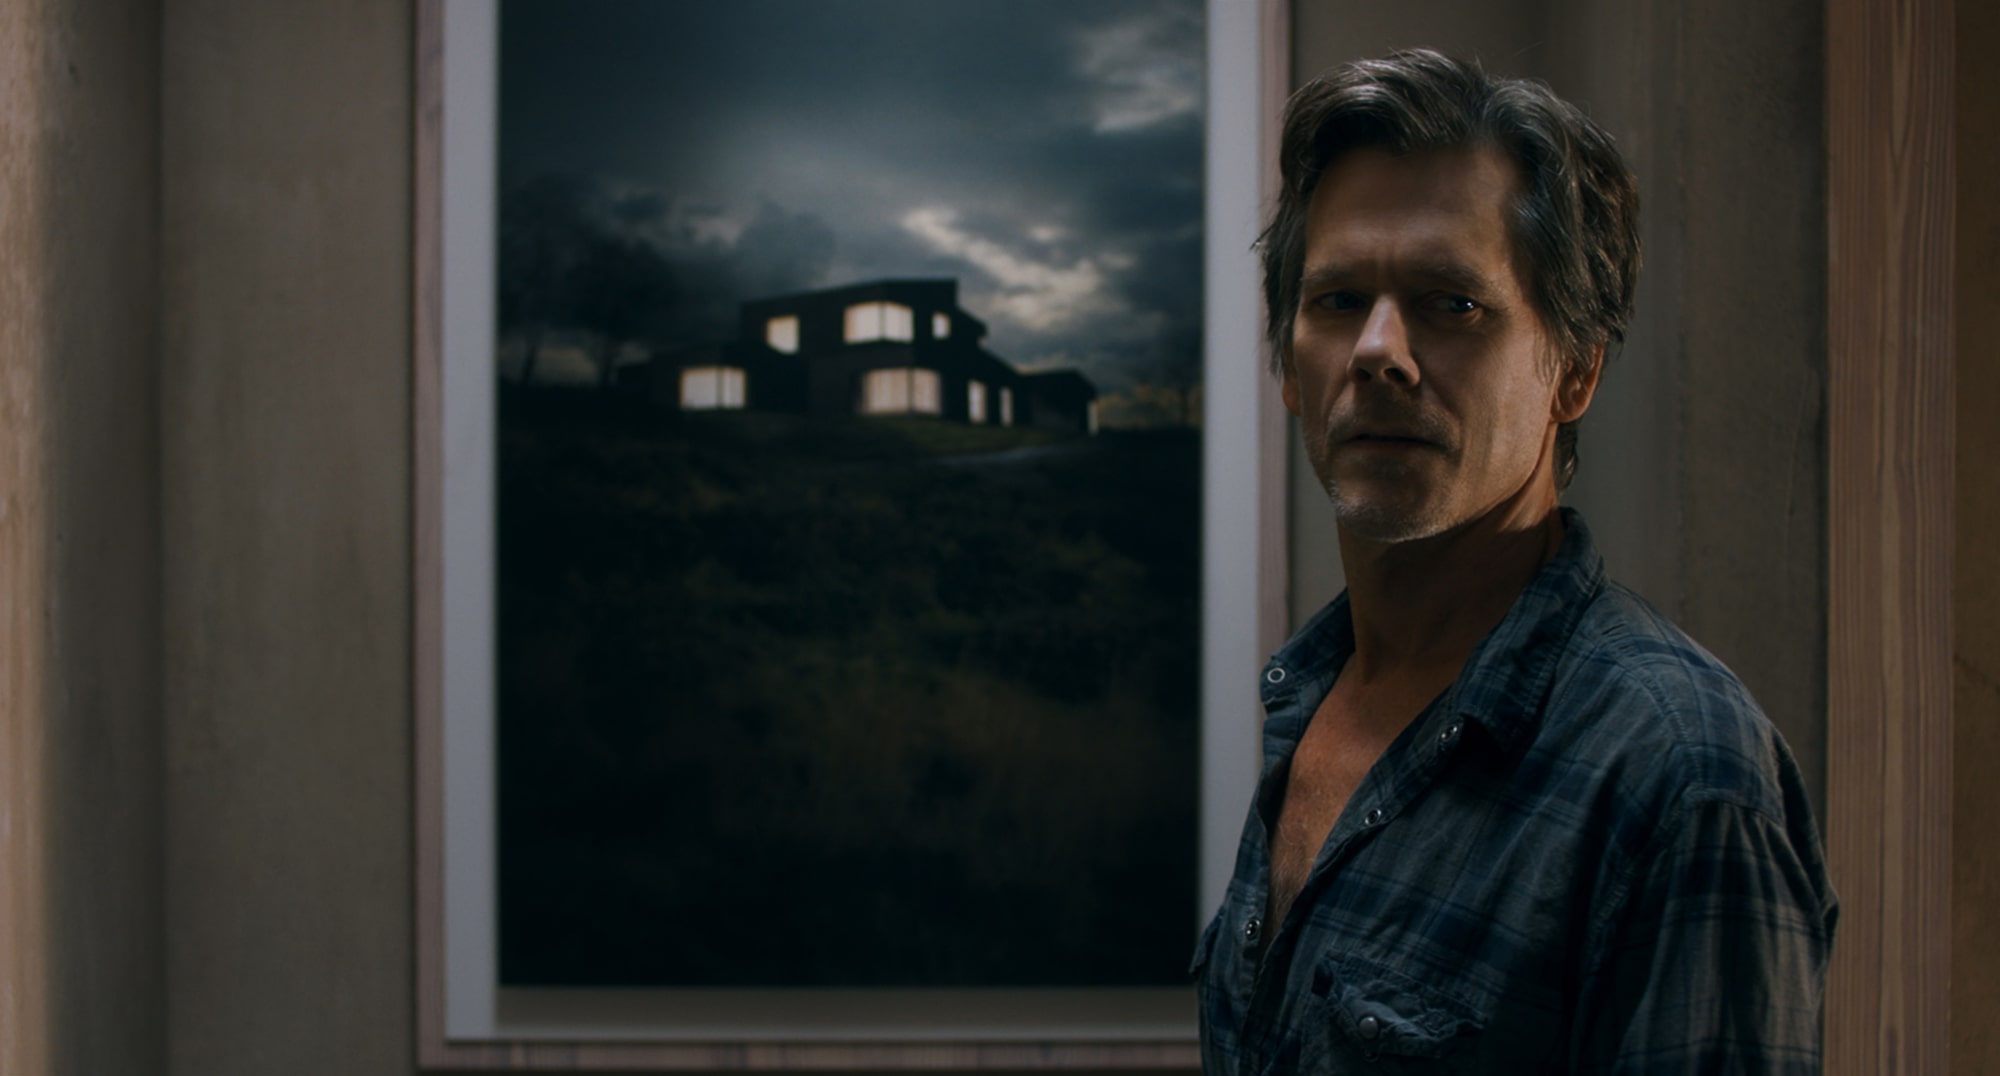 You Should Have Left Trailer Starring Kevin Bacon